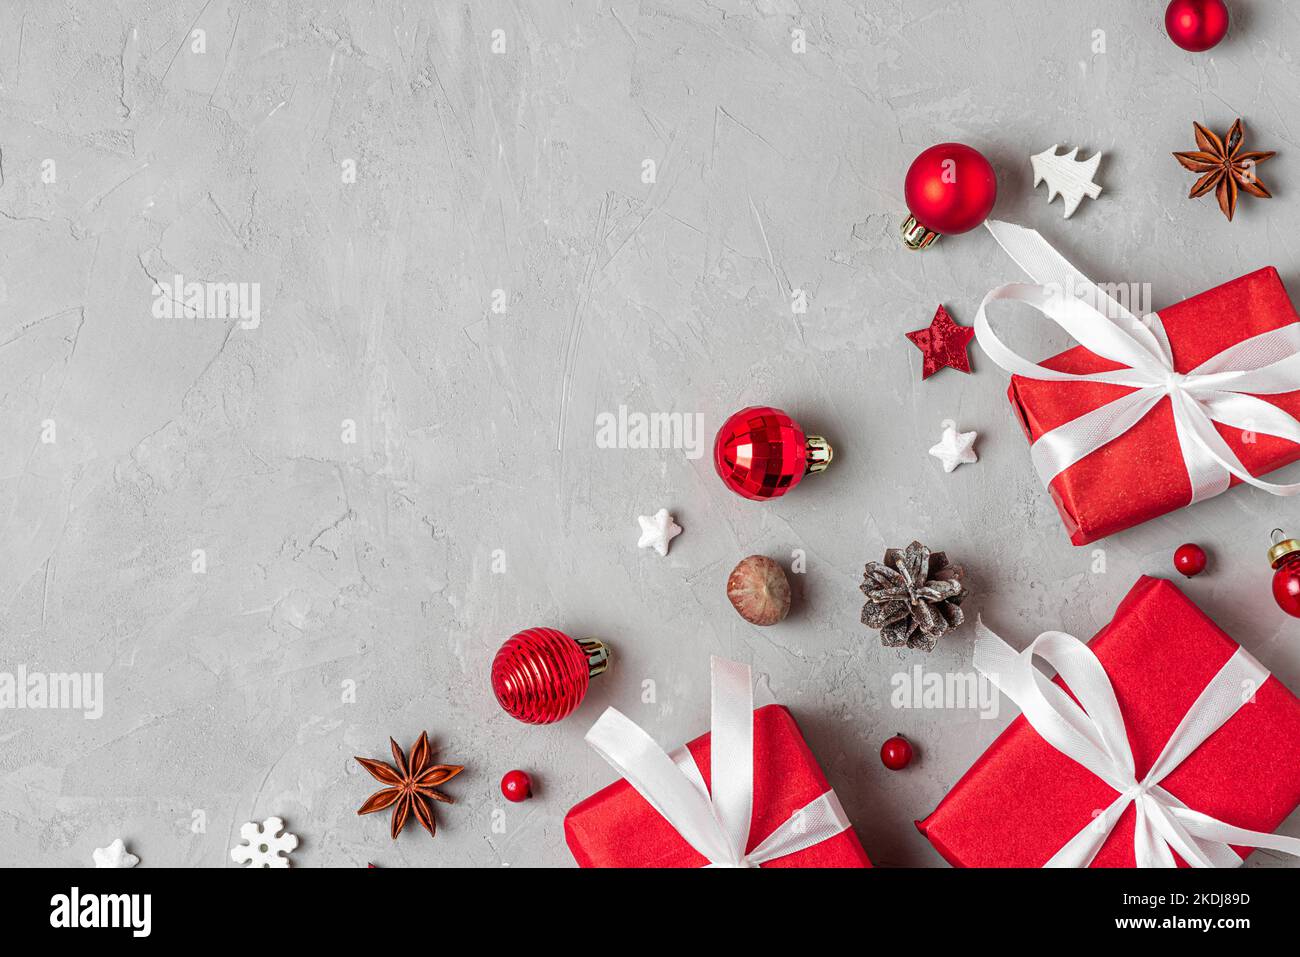 Christmas composition. Red gift boxes with holiday decorations, pine cones and nuts on gray background. Flat lay. Top view with copy space Stock Photo